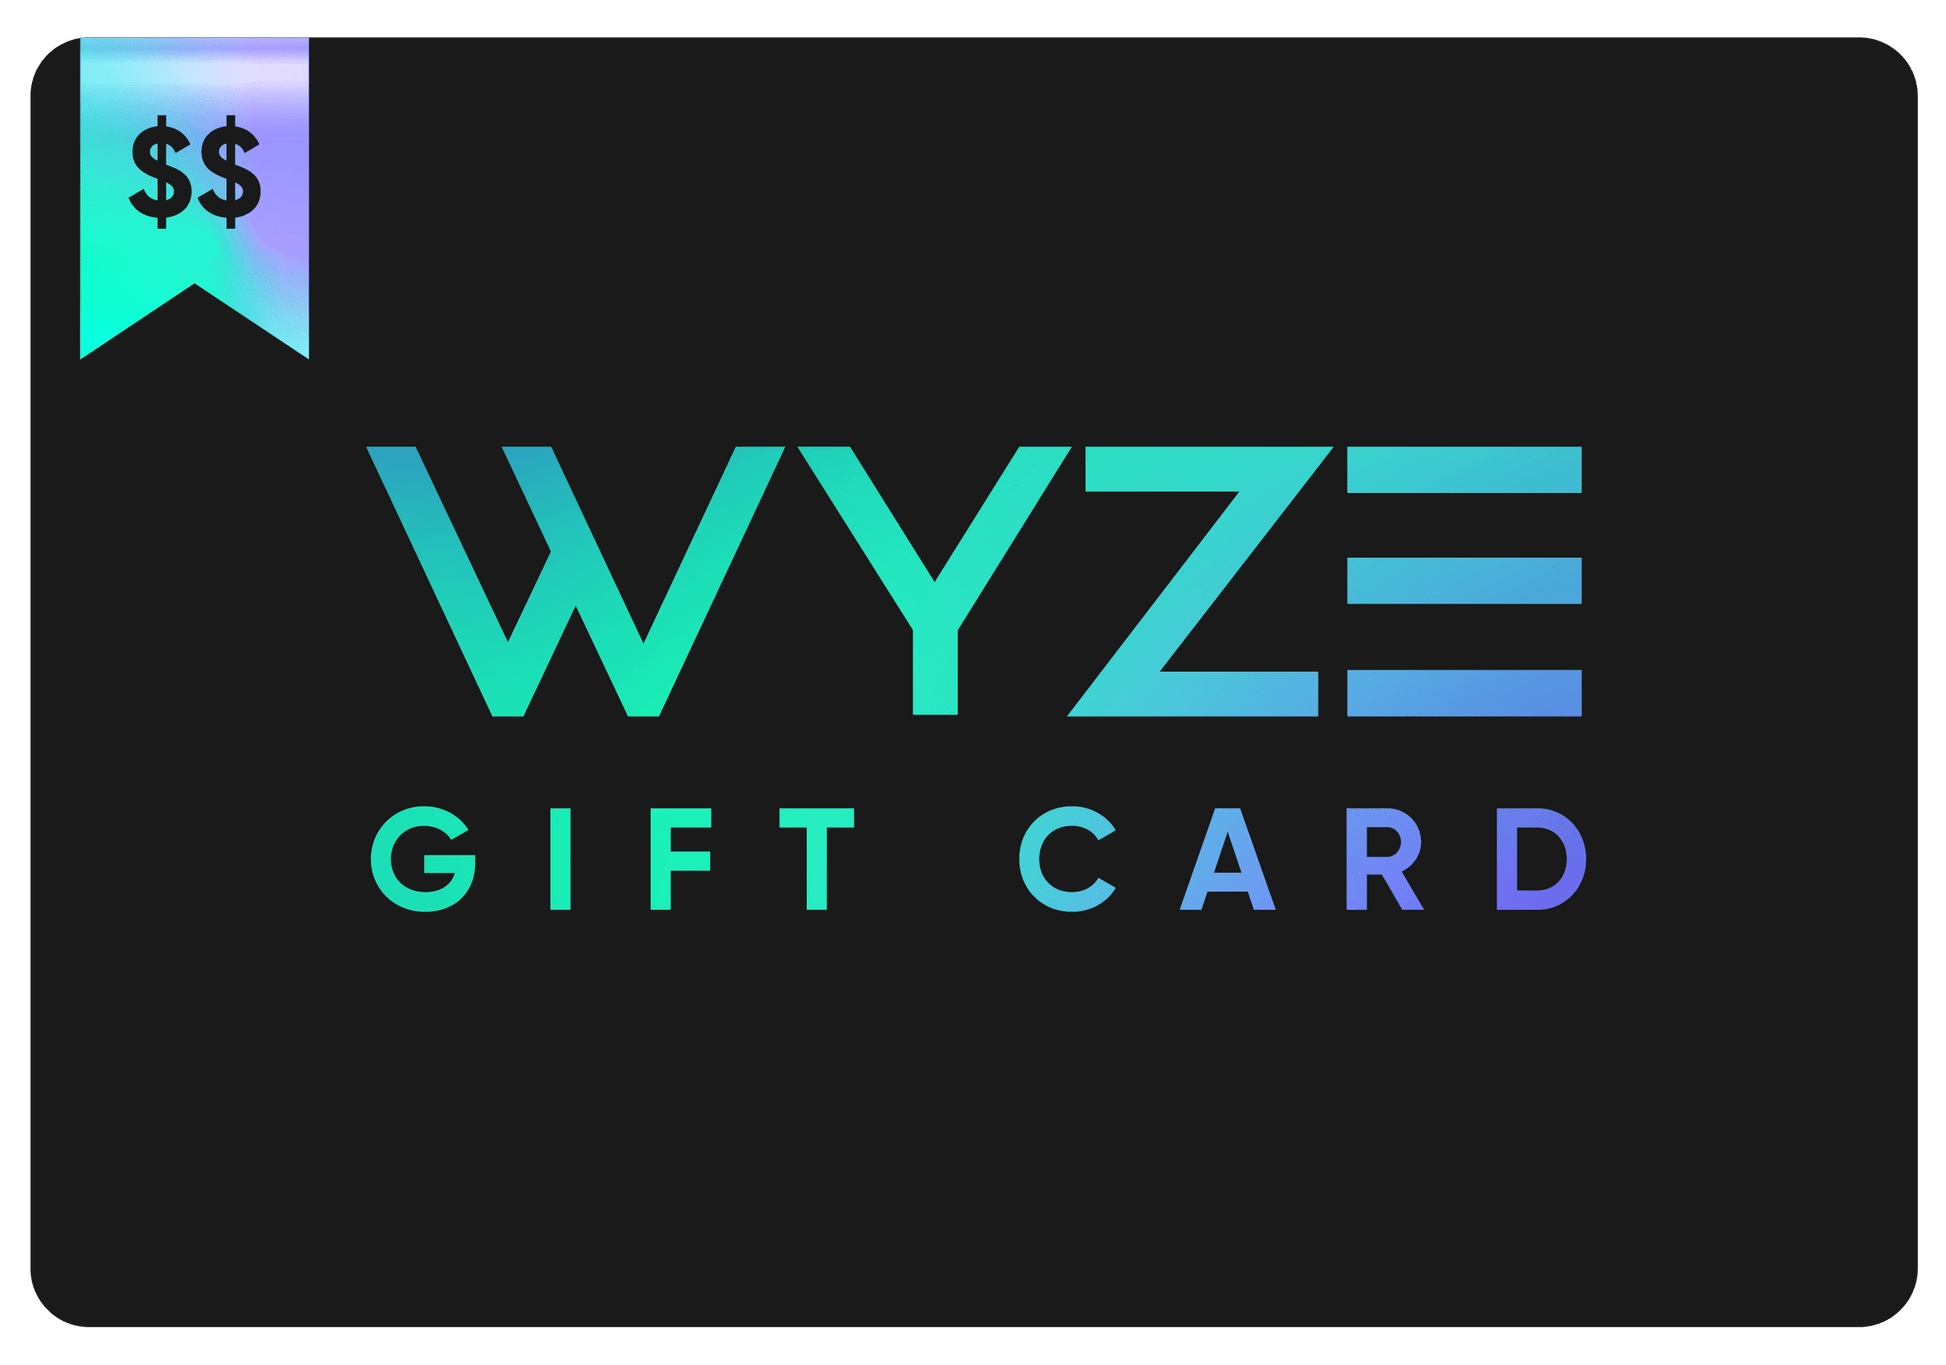 Wyze Digital Gift Card. Black background with green gradiant colored Wyze logo and the words "Gift card" centered.